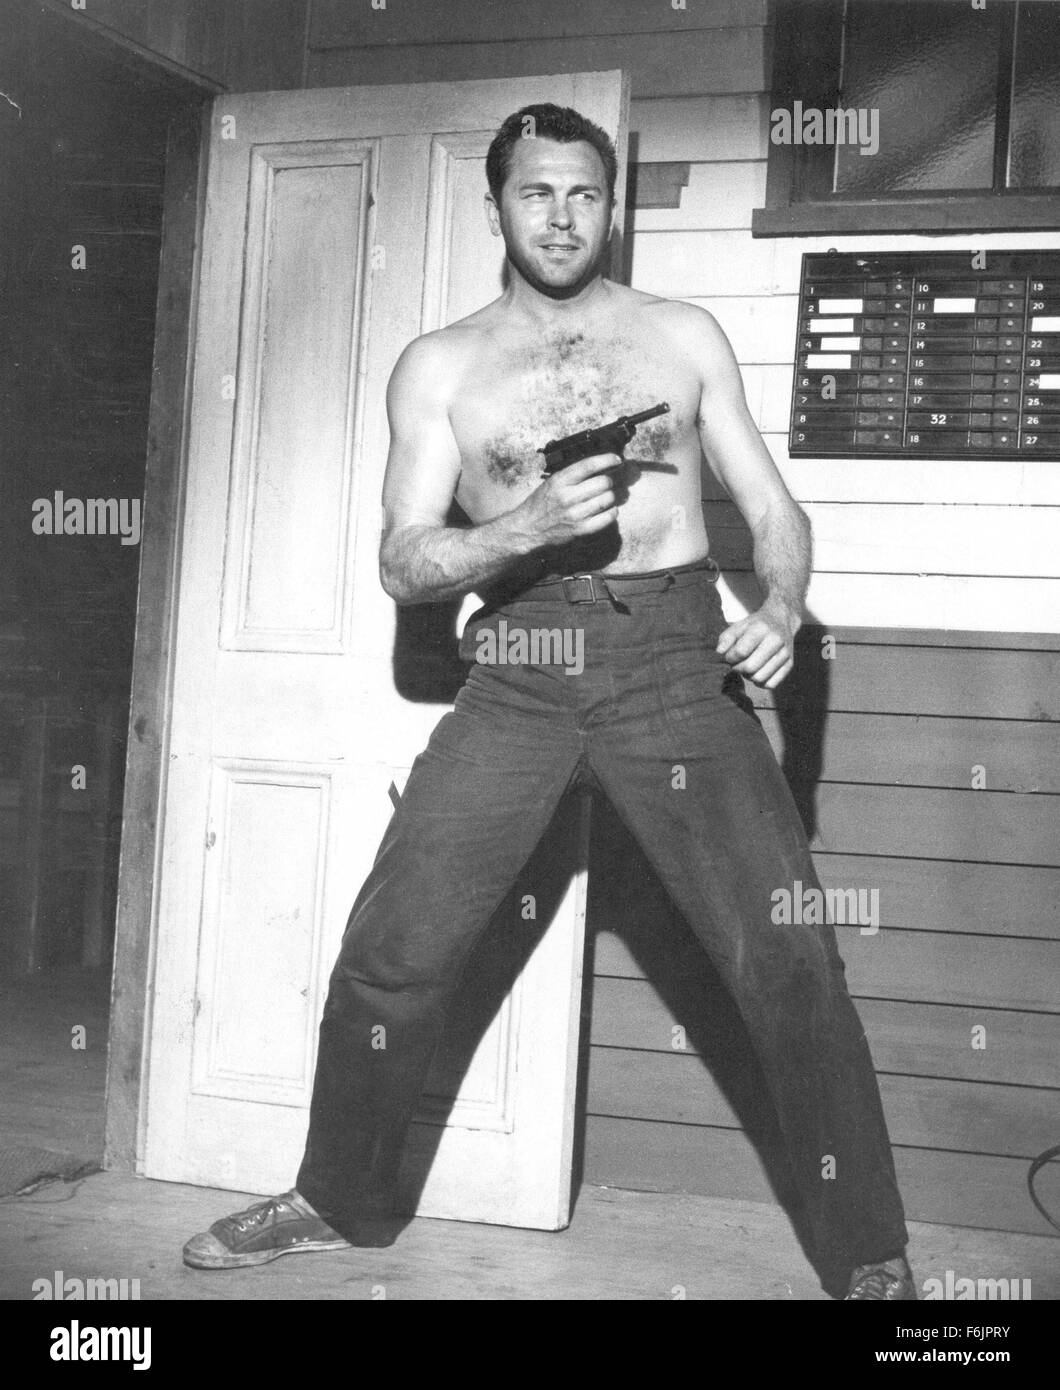 Nov 07, 2004; Los Angeles, CA, USA; File Photo: 1959 MGM Movie Still from 'Flood of Fear.' Singer HOWARD KEEL, the baritone who romanced his way through a series of glittery MGM musicals such as 'Kiss Me Kate' and 'Annie Get Your Gun' and later revived his career with television's 'Dallas,' died Sunday of colon cancer. He was 85. Keel studie shis lines before performance. Stock Photo